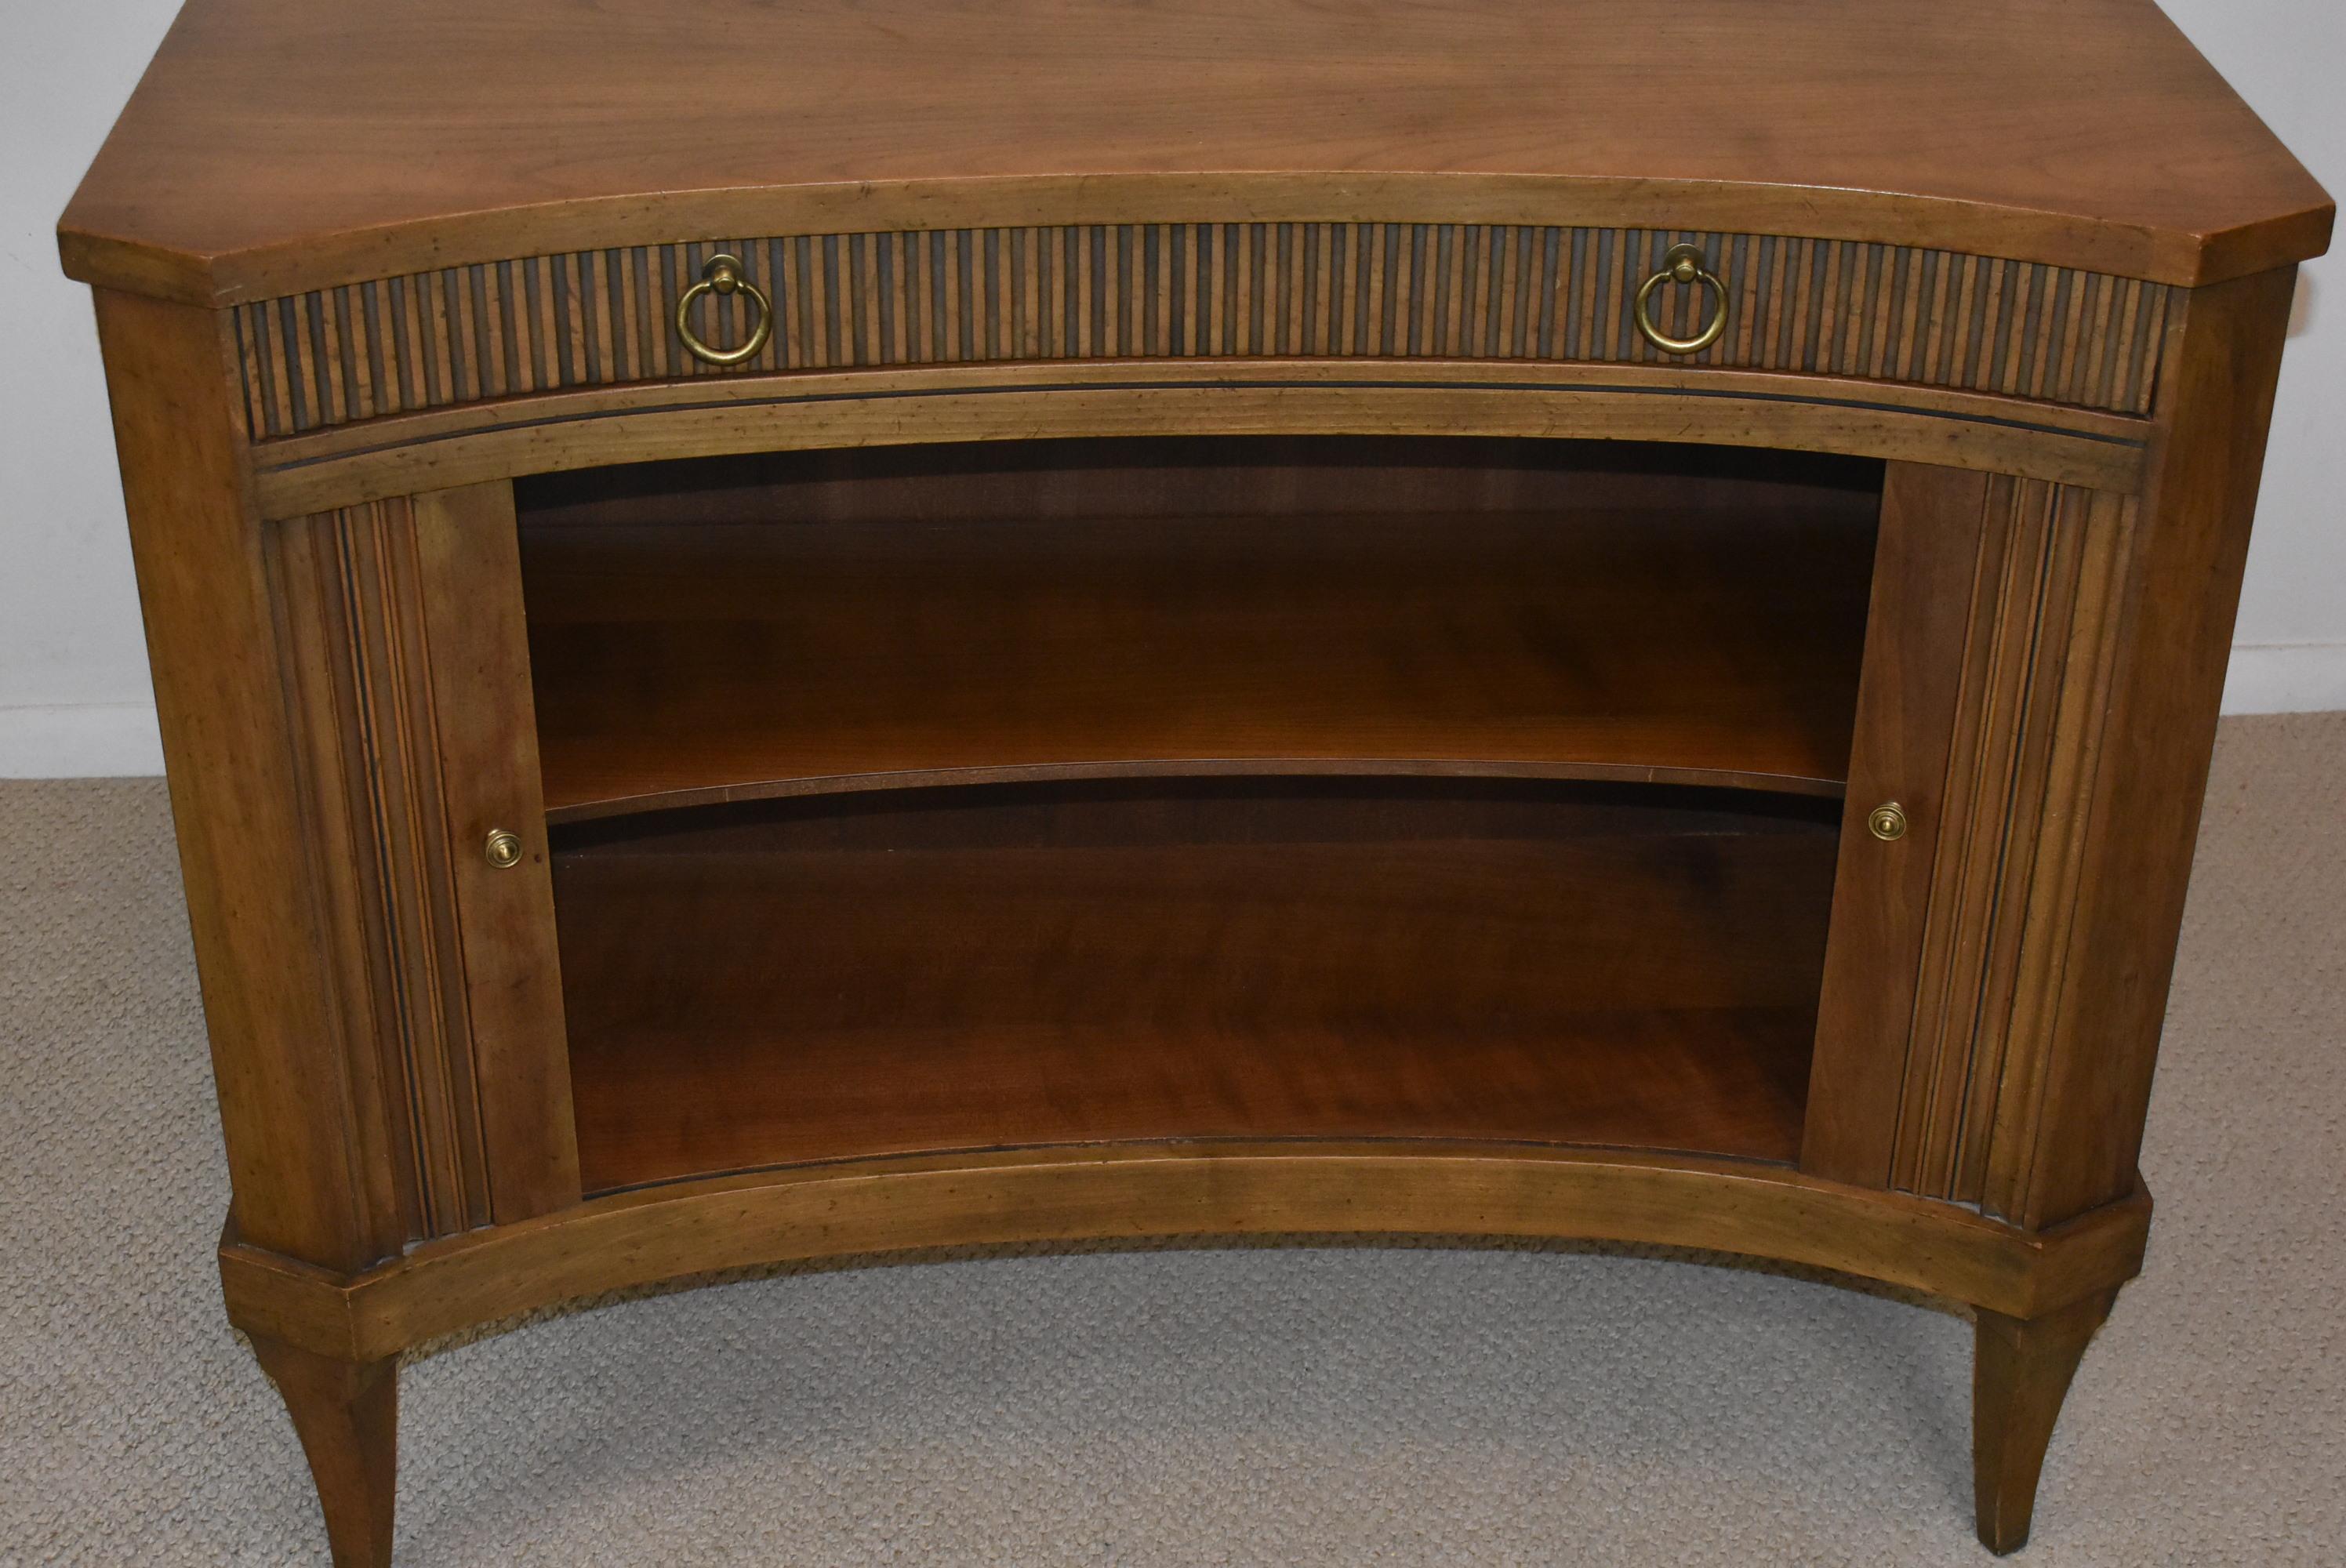 North American Baker Furniture Cherry Regency Style Commode / Chest with Tambour Doors